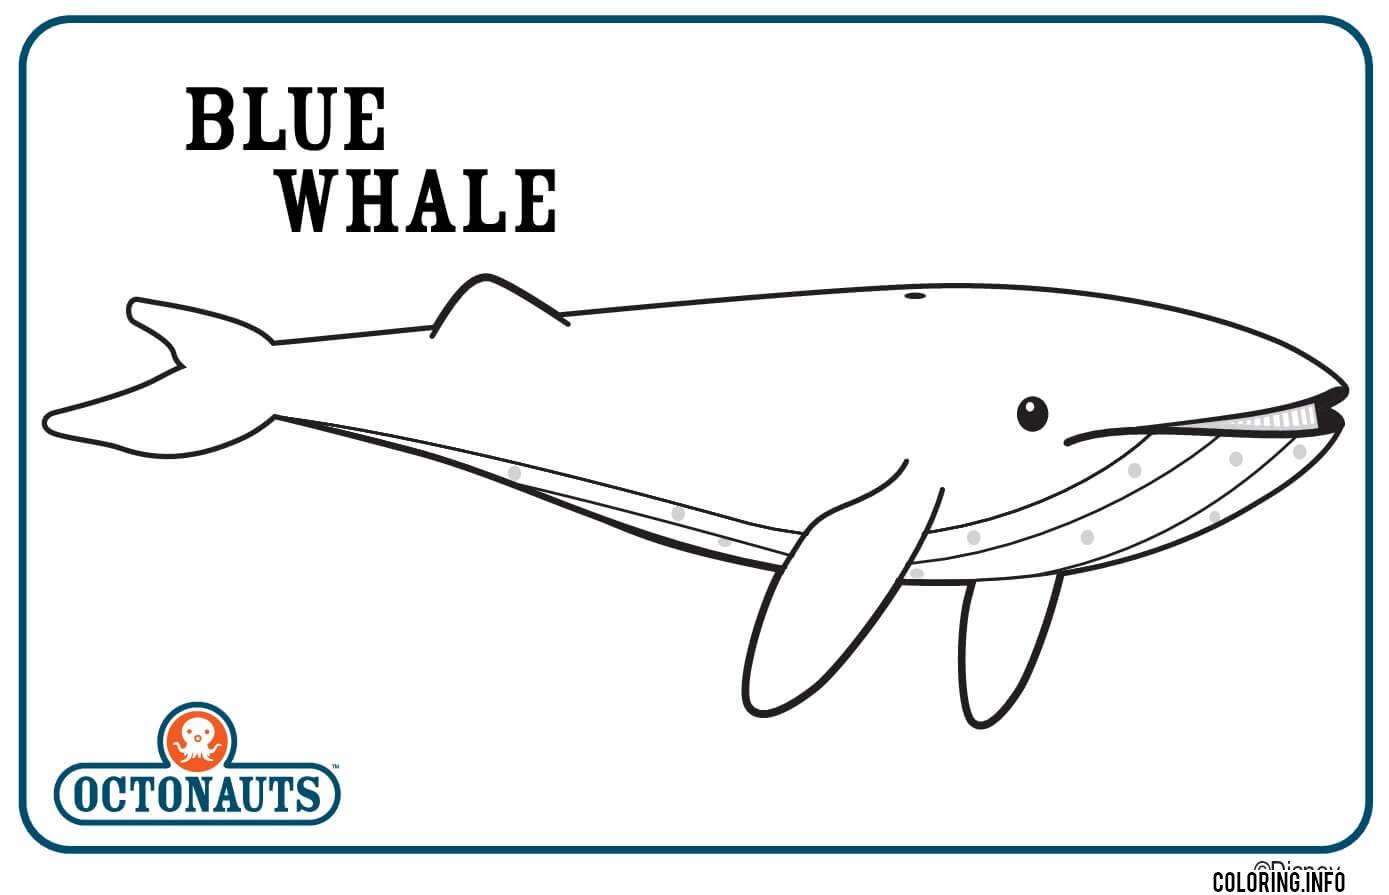 Blue Whale coloring